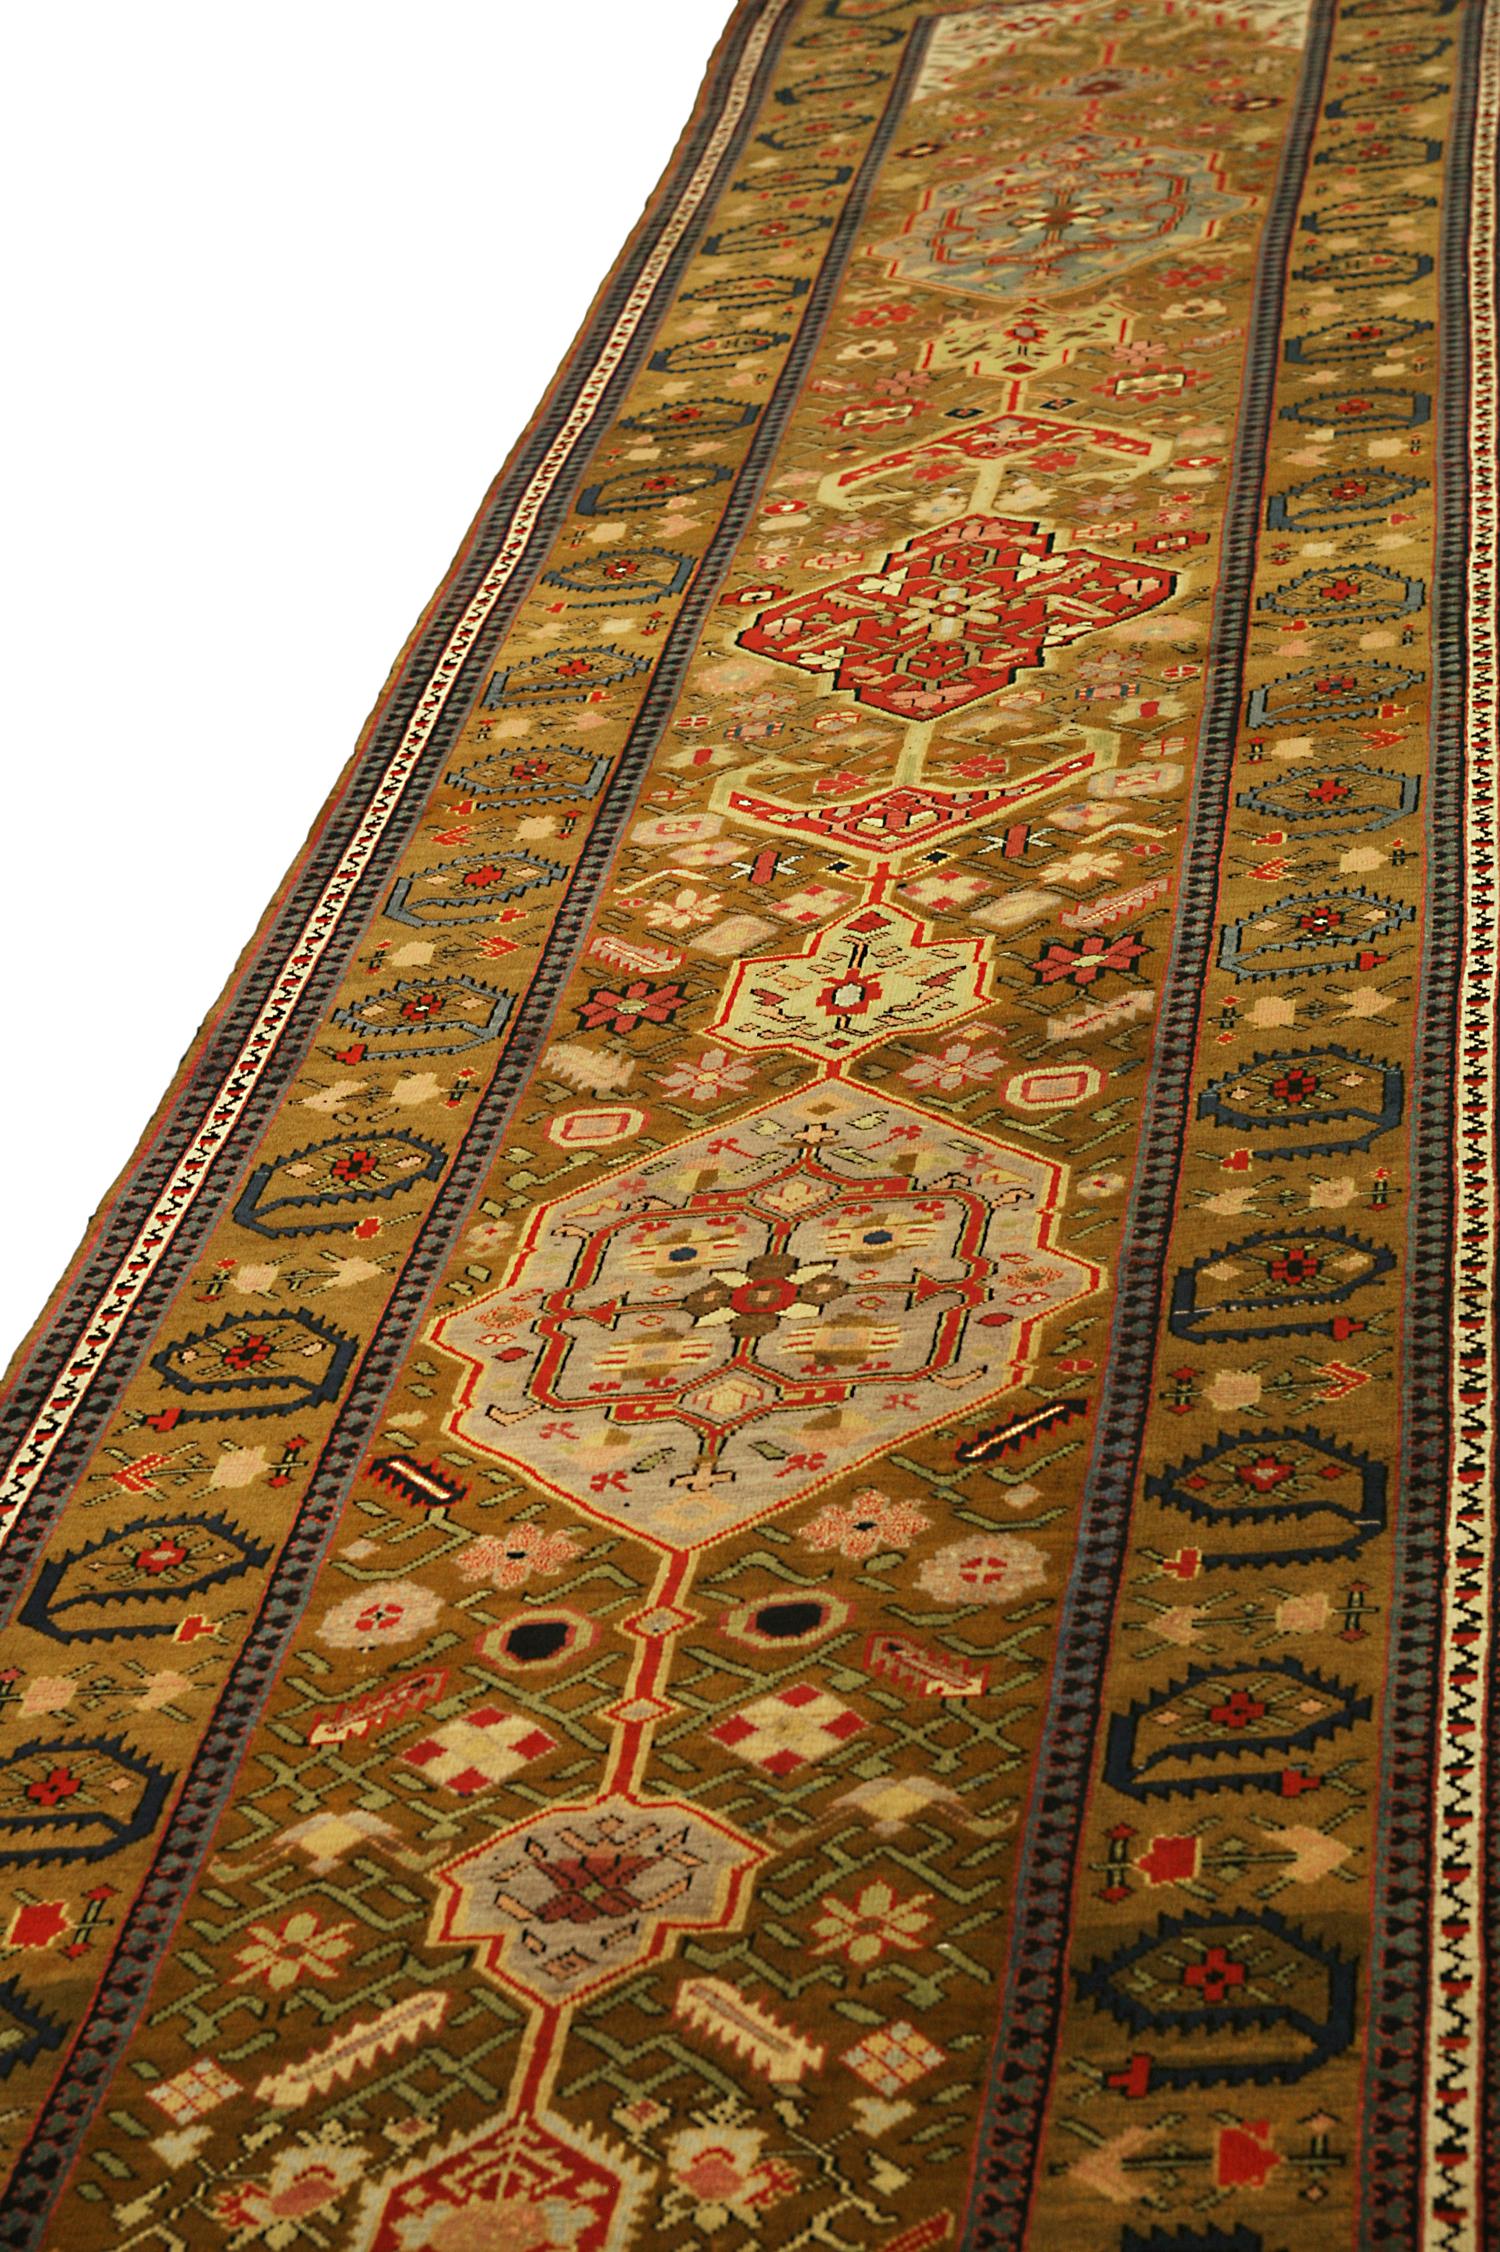 This is an antique Karabagh runner rug woven circa 1880 which has a striking design at first sight. The dark brown of the background draws attention to floral motif designs in an intriguing way. Karabagh runners, like this antique carpet, are from